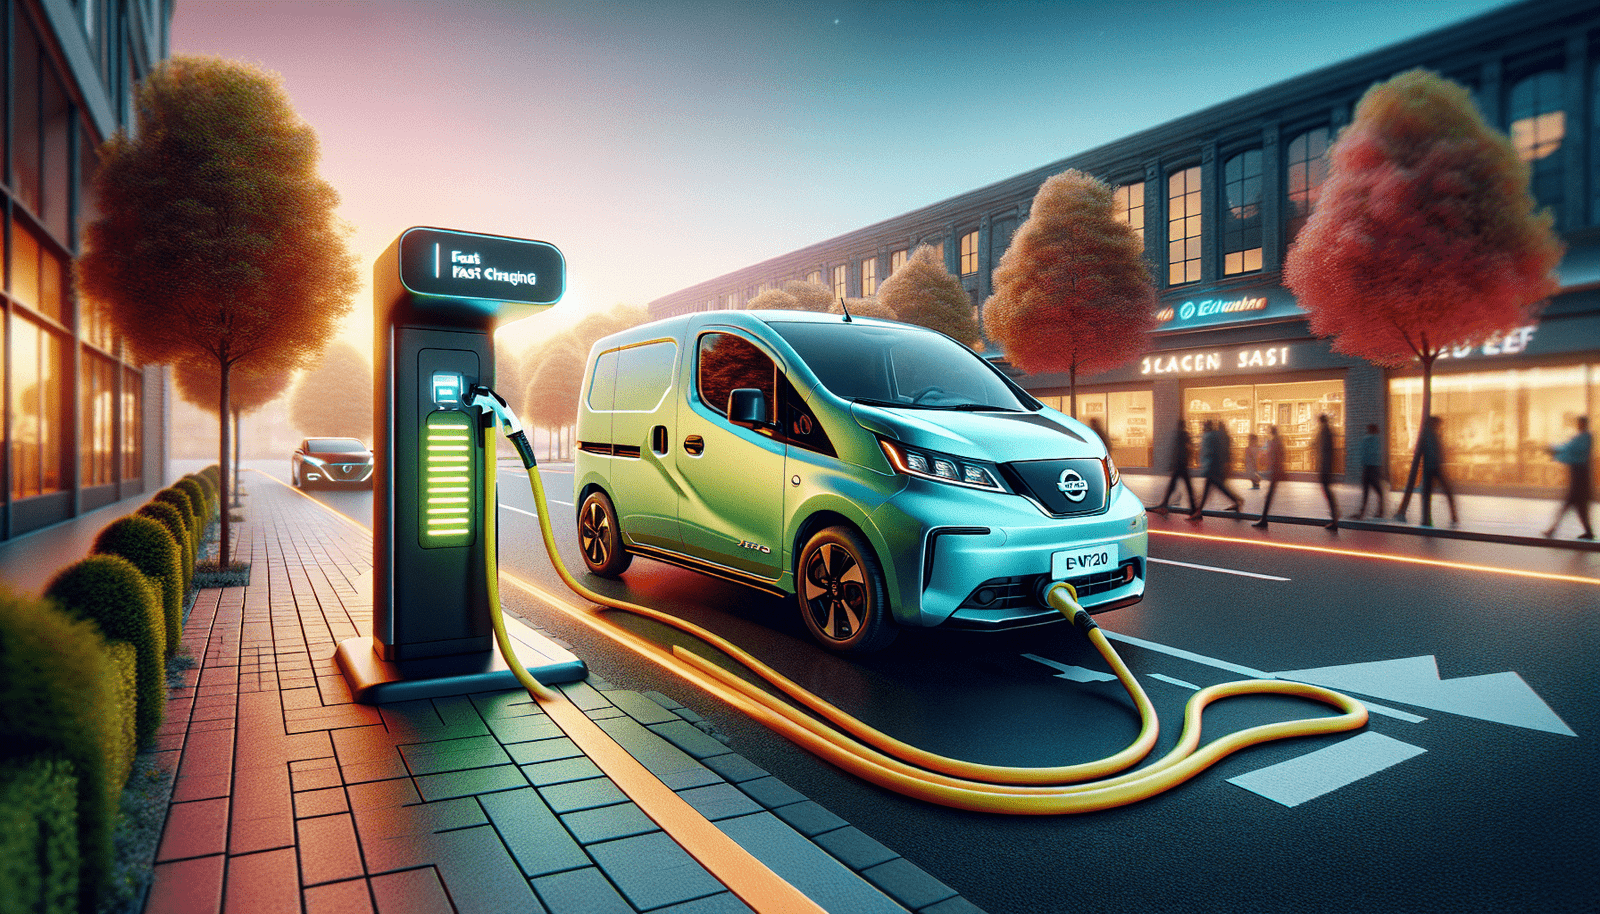 Does The Nissan E-NV200 Support Fast Charging At Public Stations?